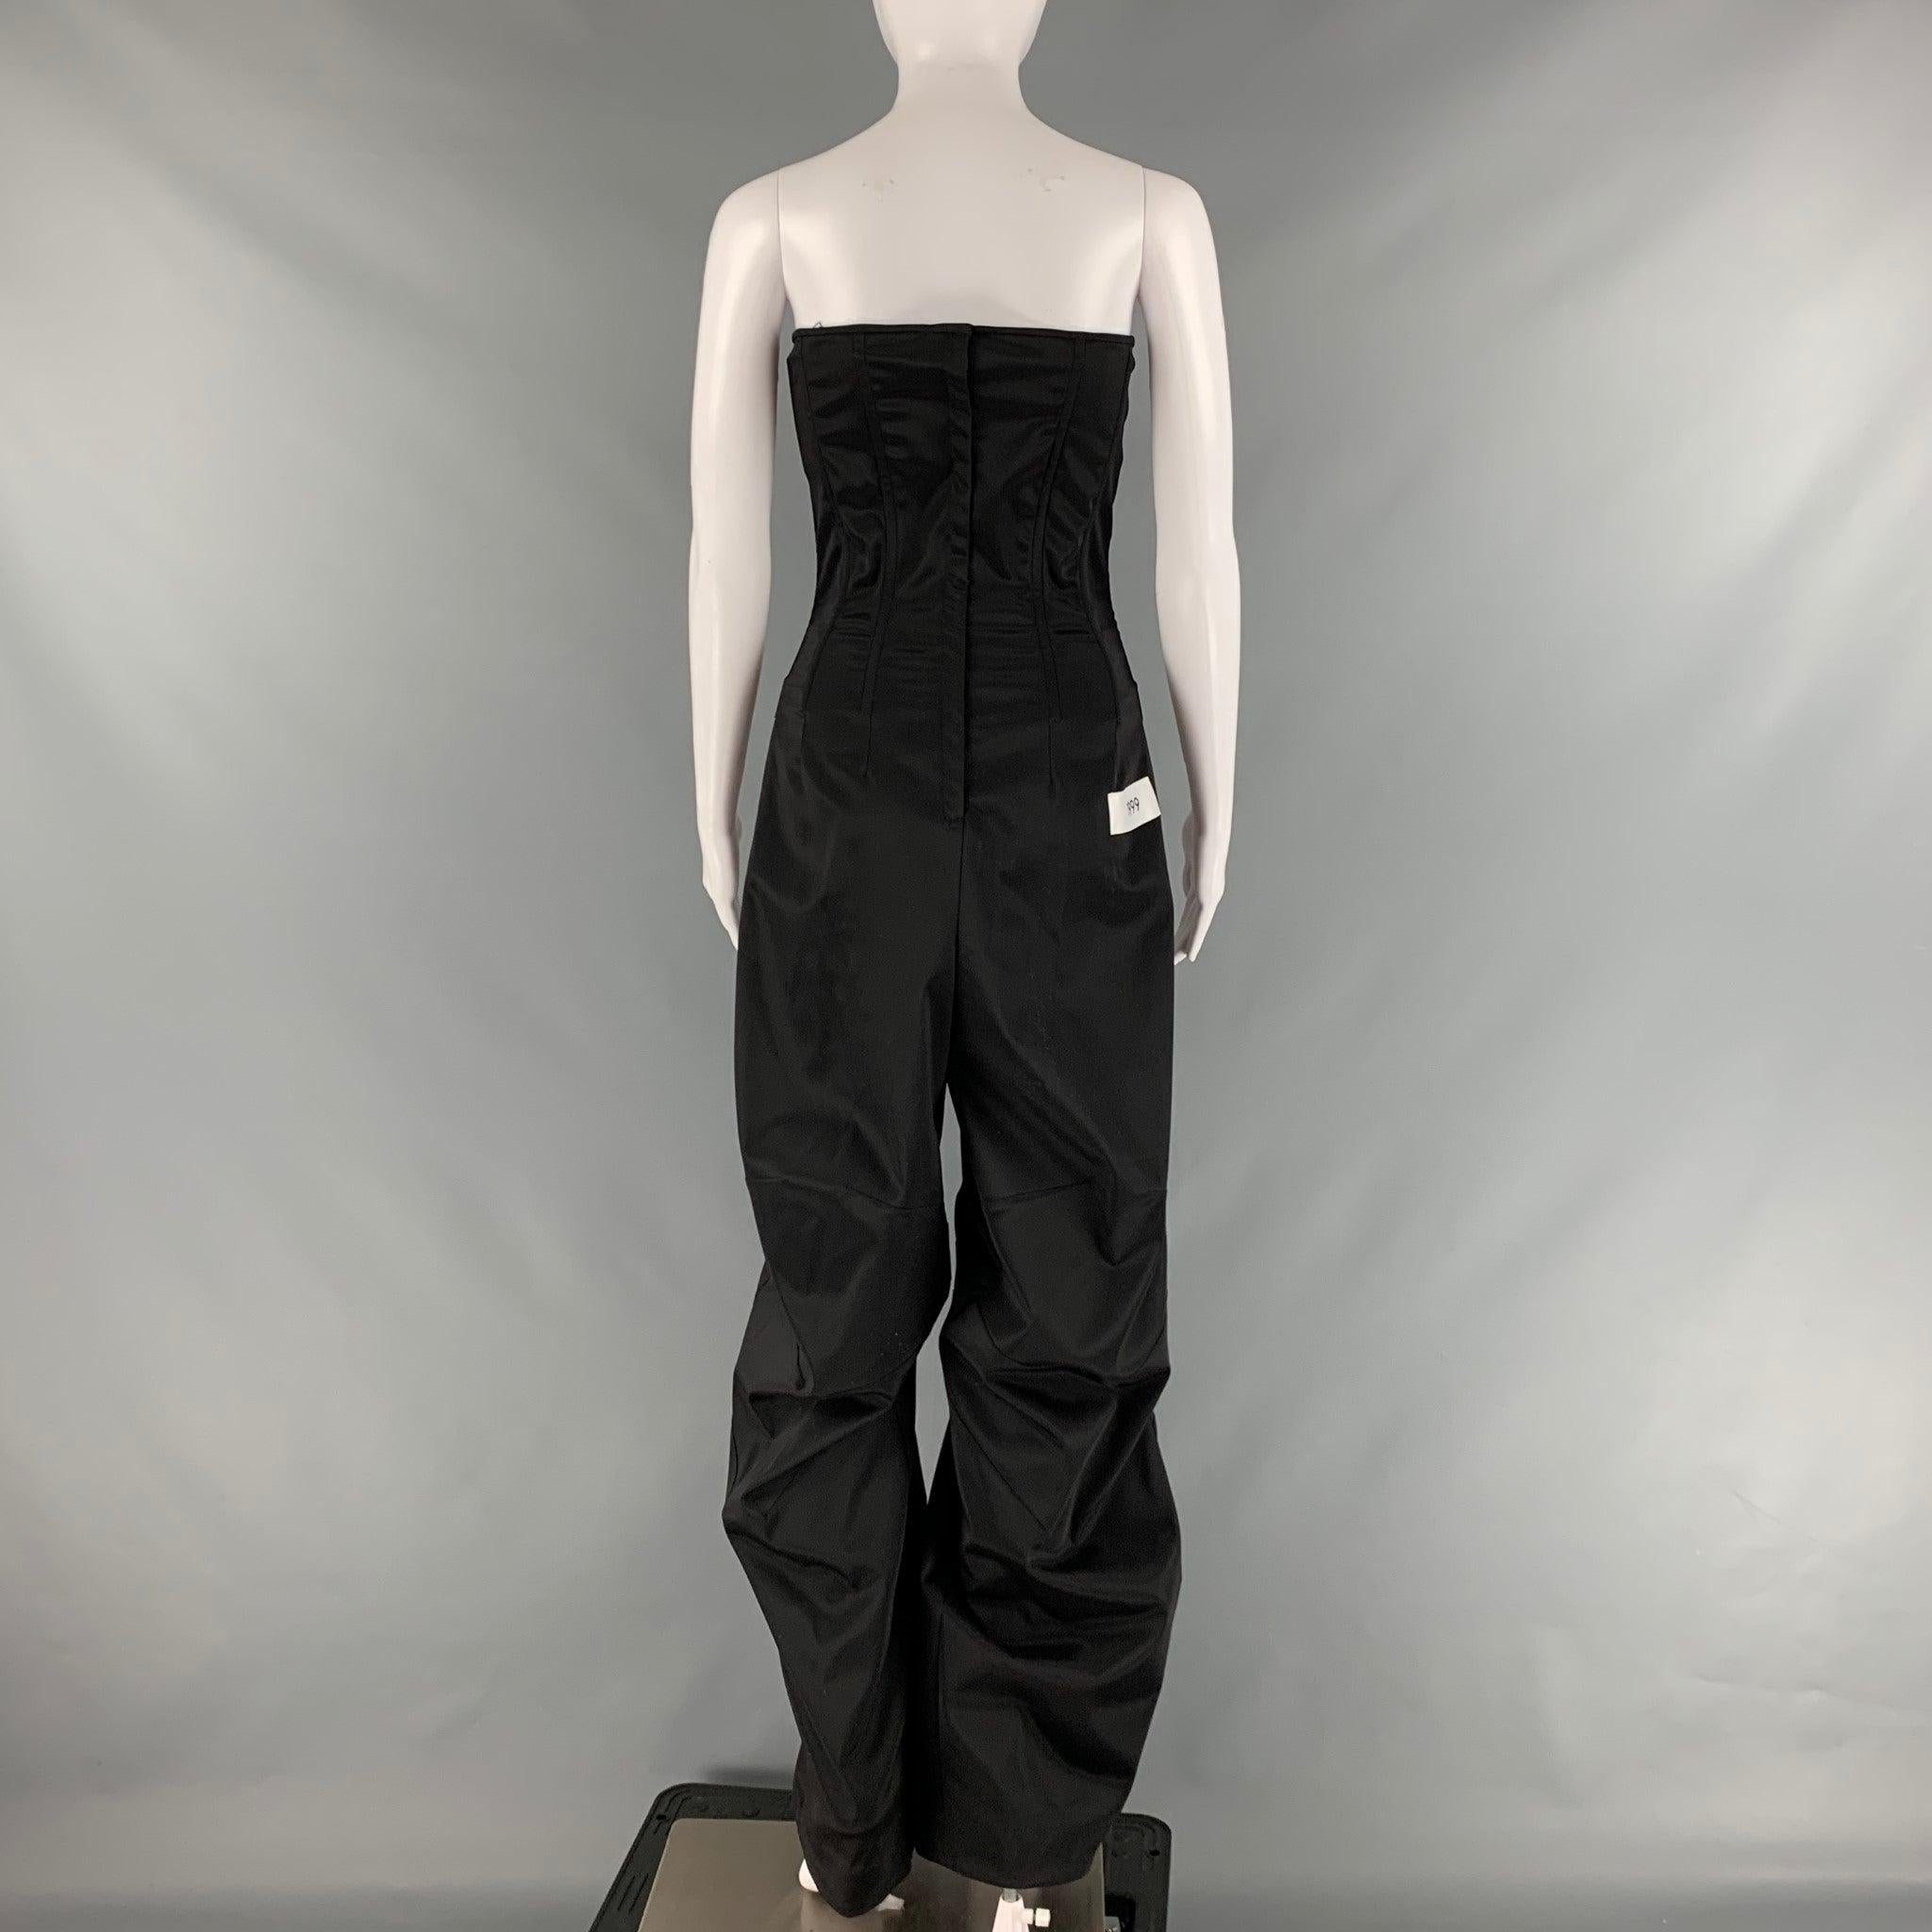 DOLCE & GABBANA Size 4 Black White Acetate Blend Strapless Jumpsuits In Excellent Condition For Sale In San Francisco, CA